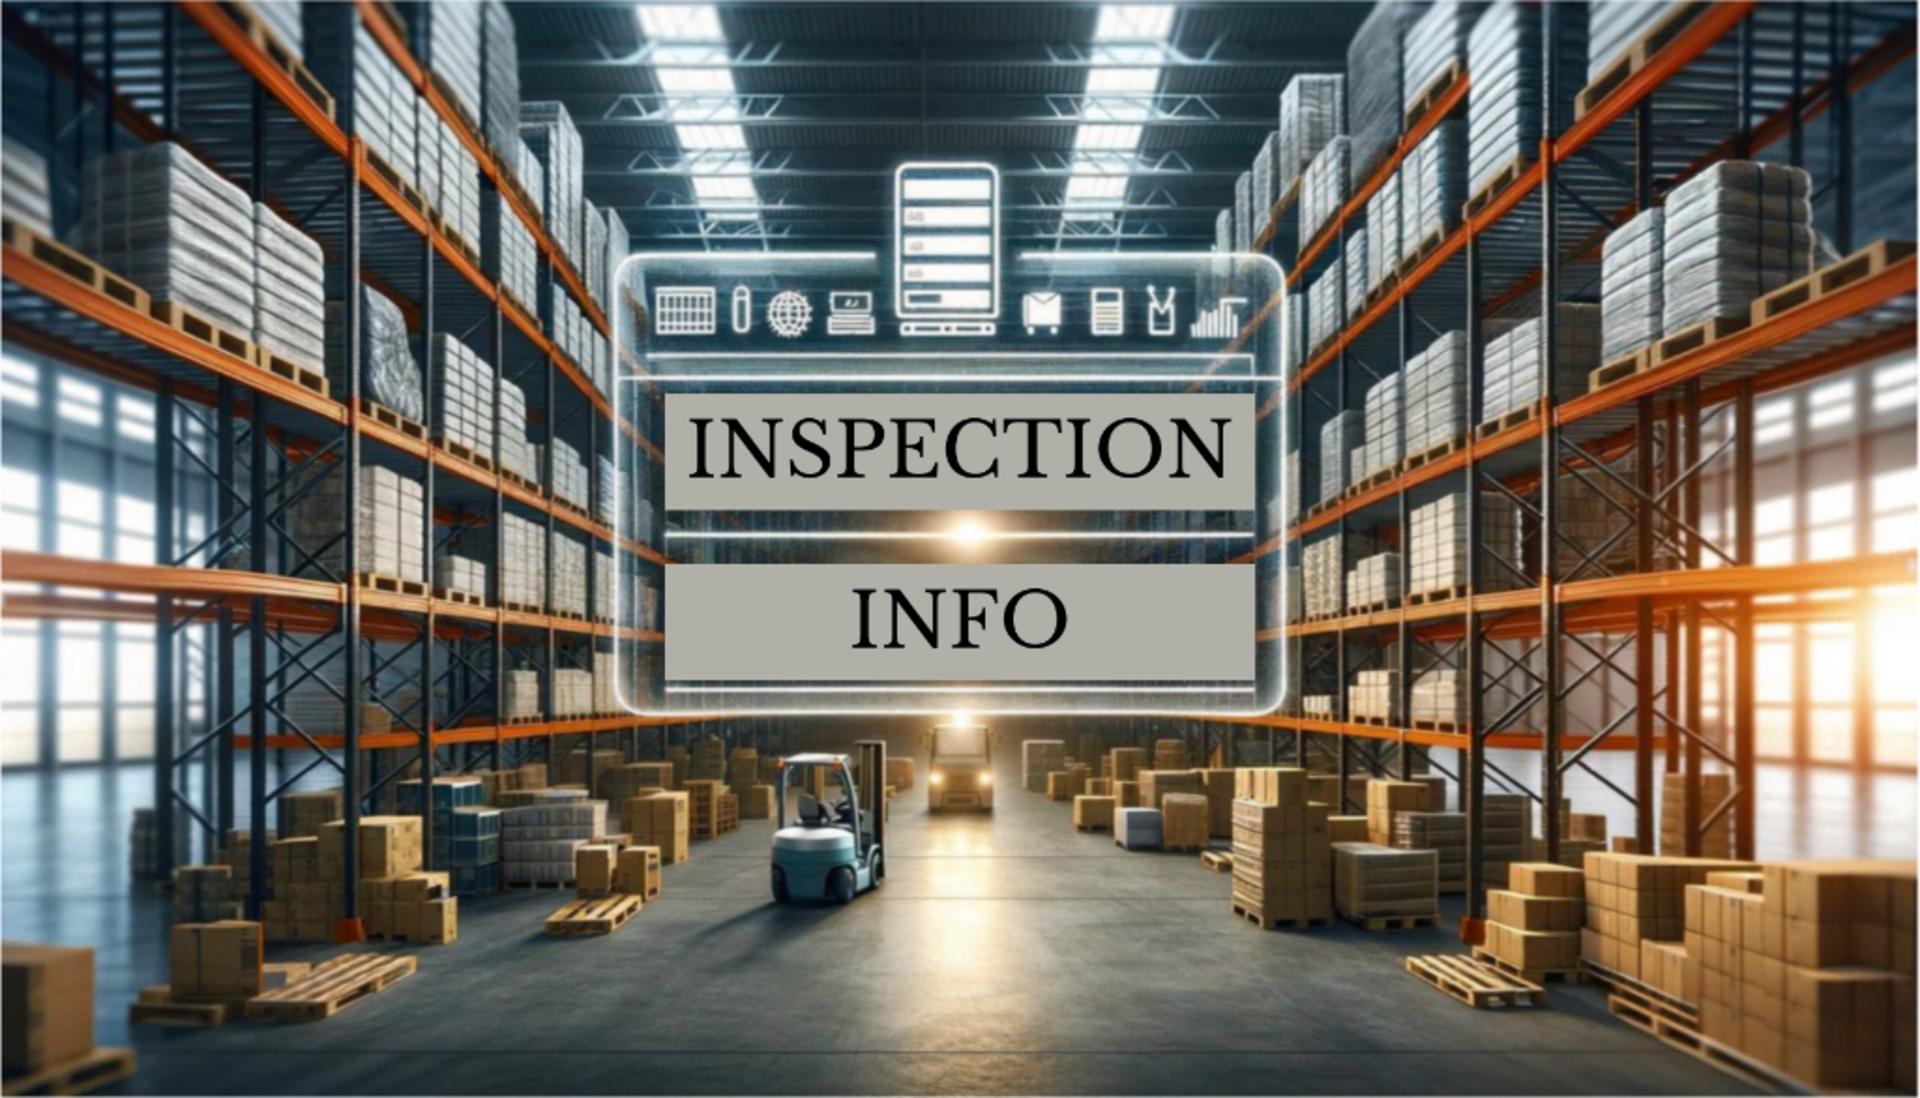 INSPECTION DETAILS: In person inspection is not currently available for this auction. If you have qu